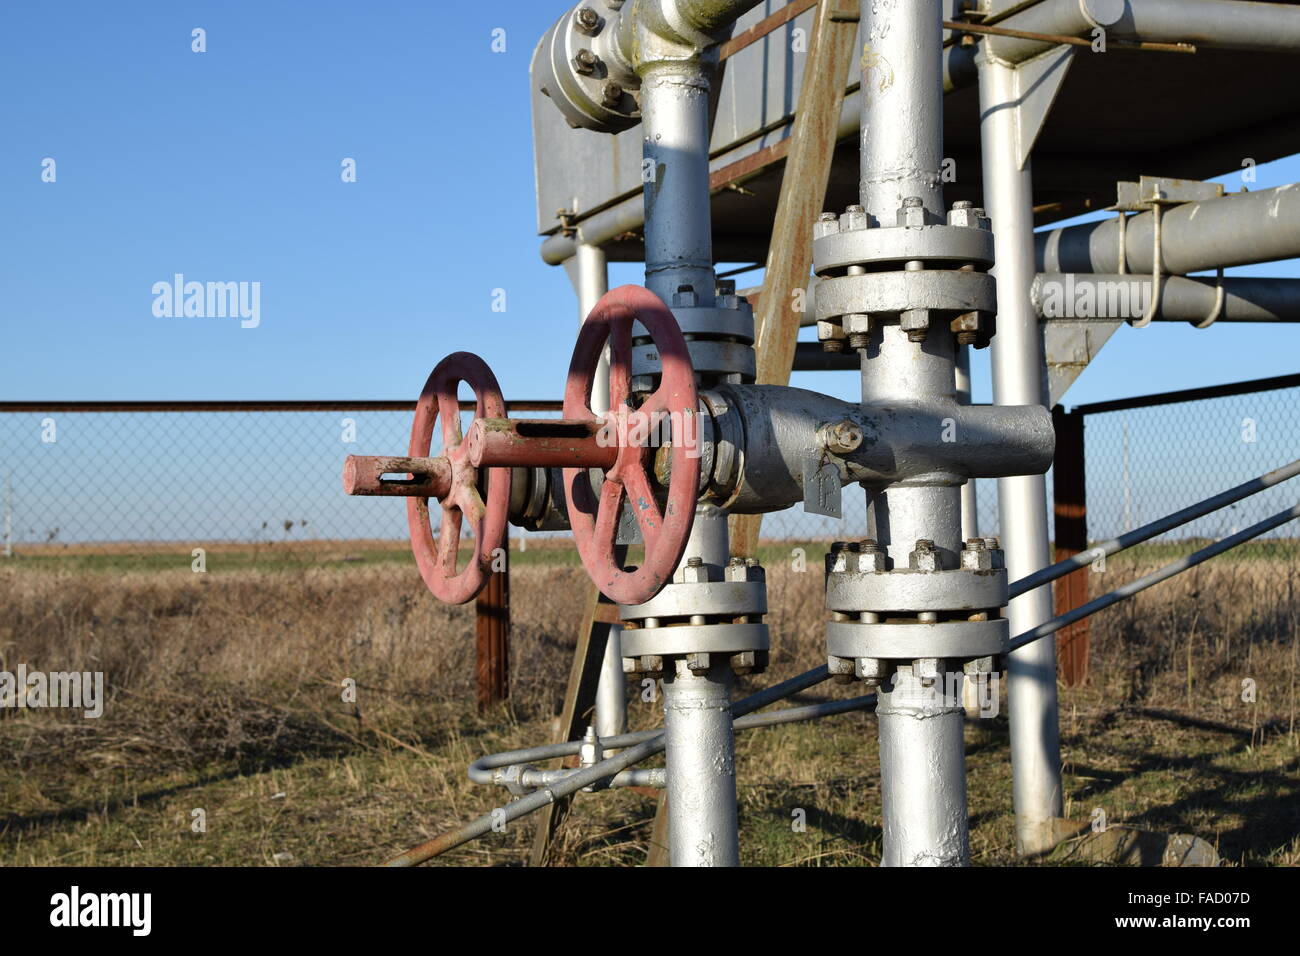 Equipment of an oil well. Shutoff valves and service equipment. Stock Photo